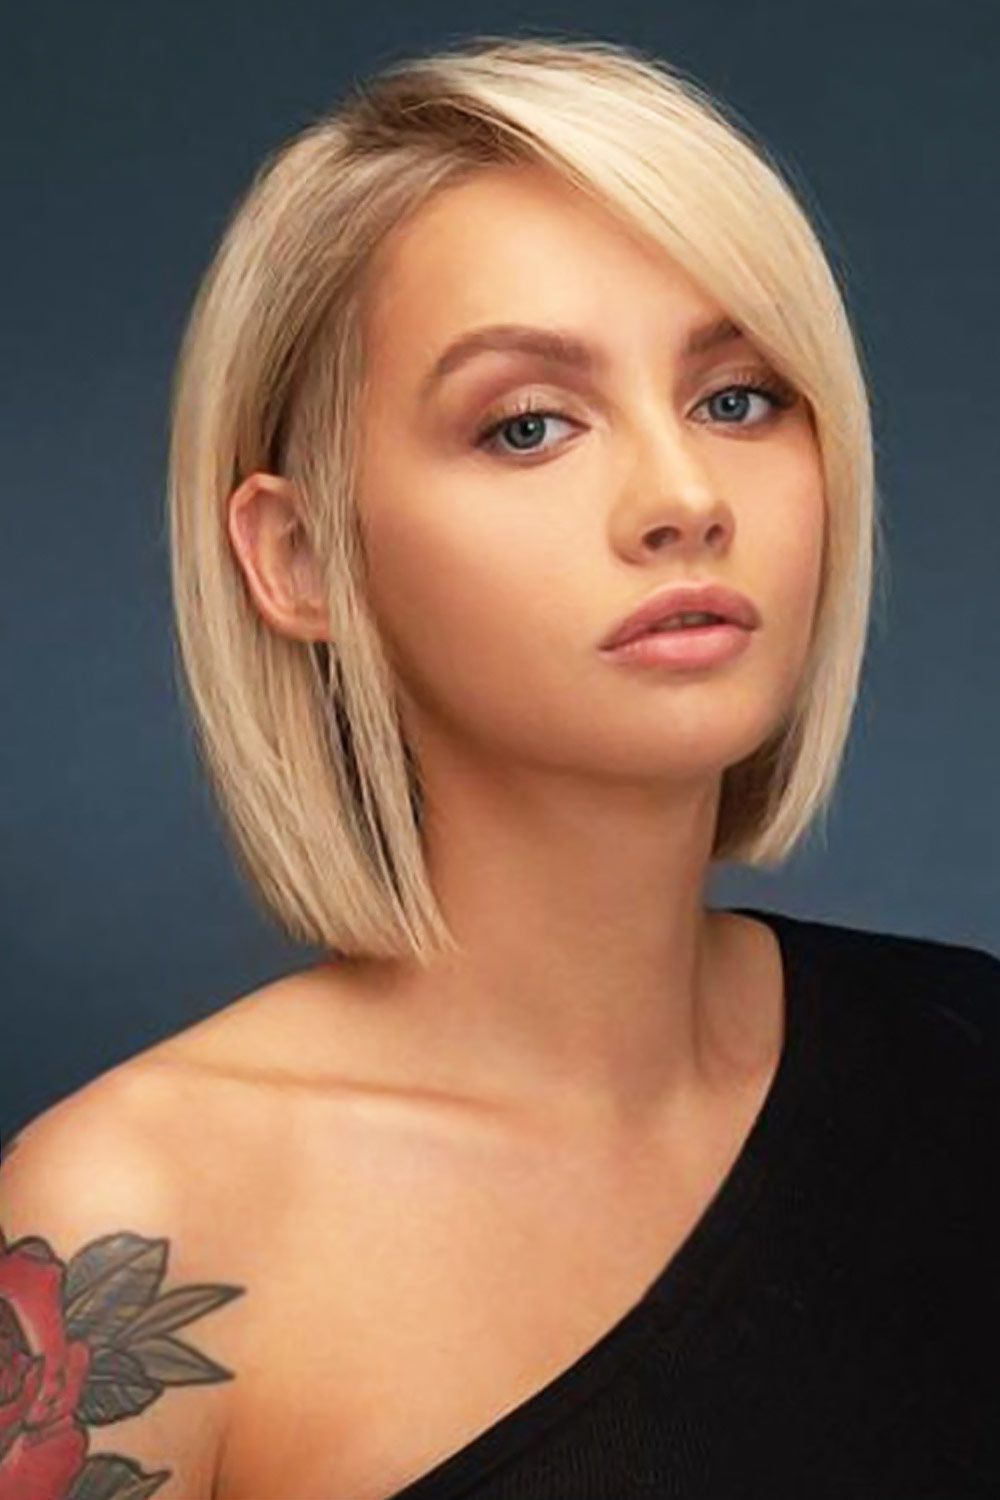 Short hairstyles for Round Face 17 Short hair for round face Asian | Short hairstyles for fat faces and double chins | Short hairstyles for round faces and thin hair Short Hairstyles for Round Face Women